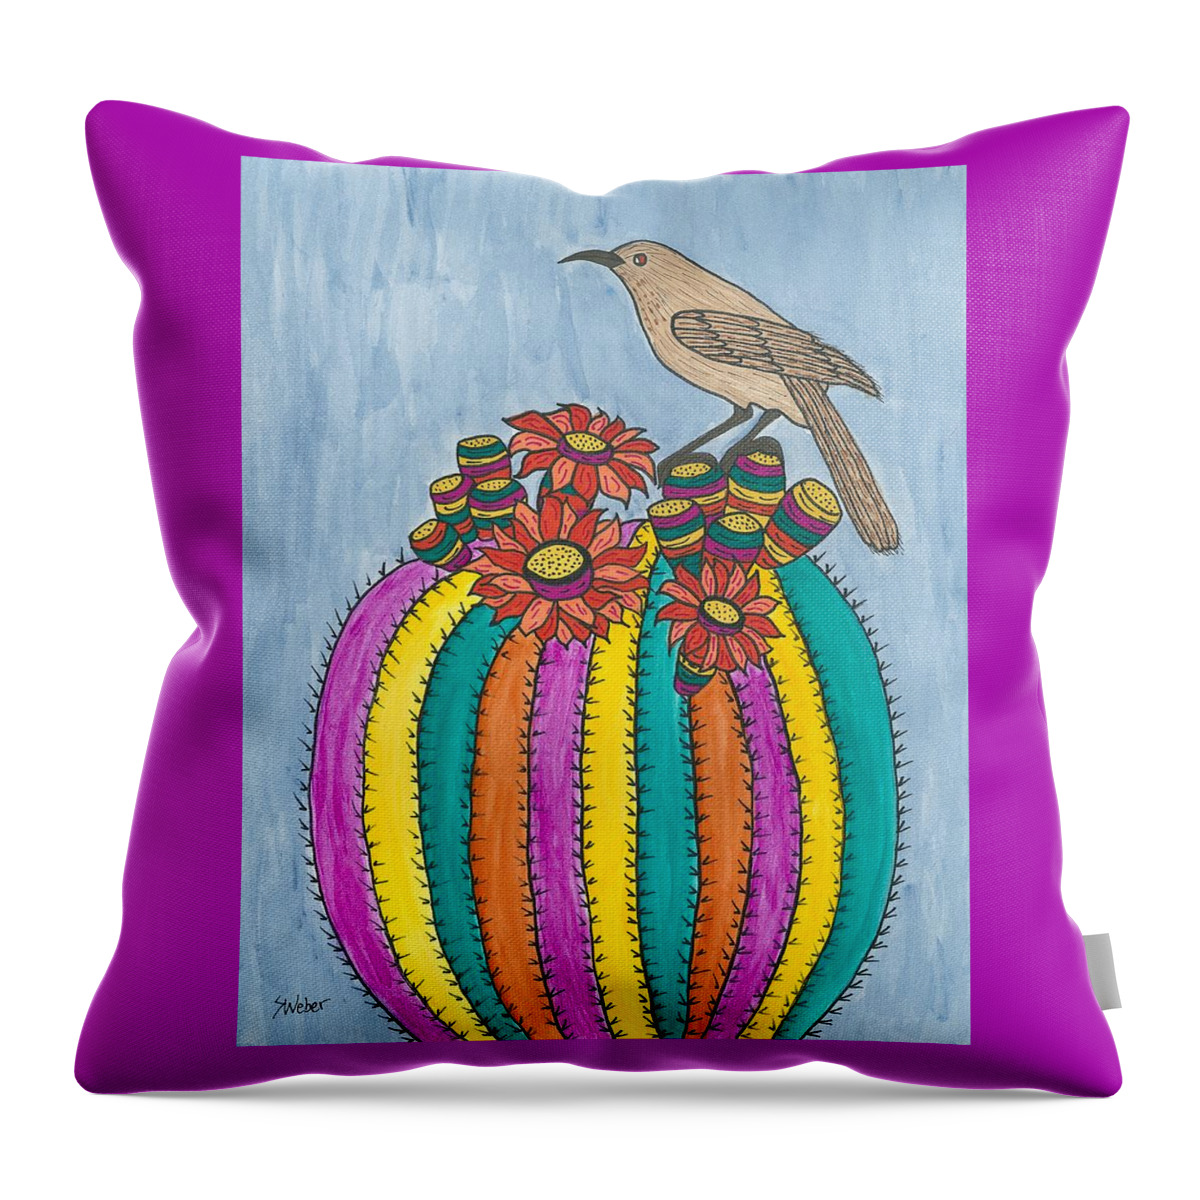 Cactus Throw Pillow featuring the painting Barrel of Cactus Fun by Susie Weber